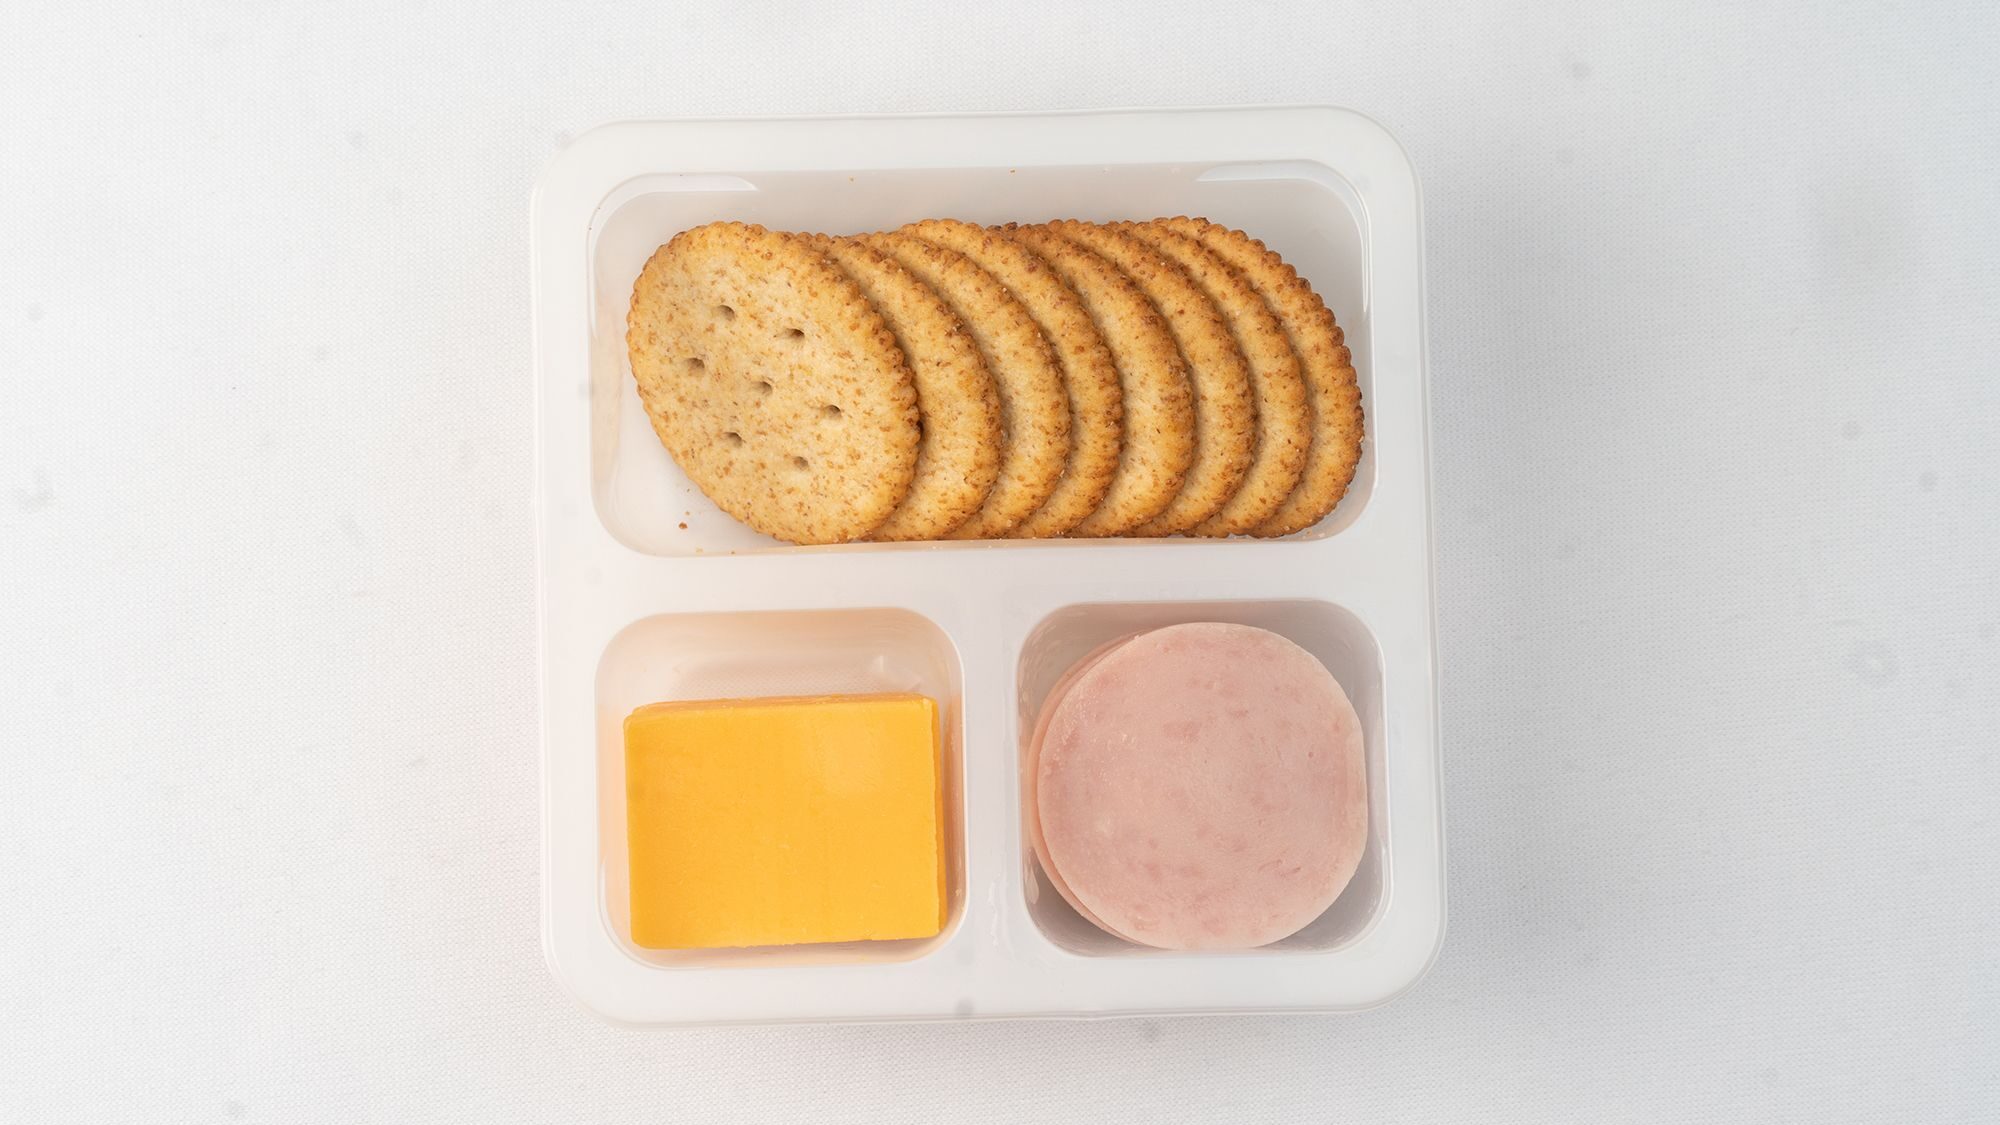 Image of Lunchables. Consumer Reports has petitioned the USDA to remove school Lunchables from scho...